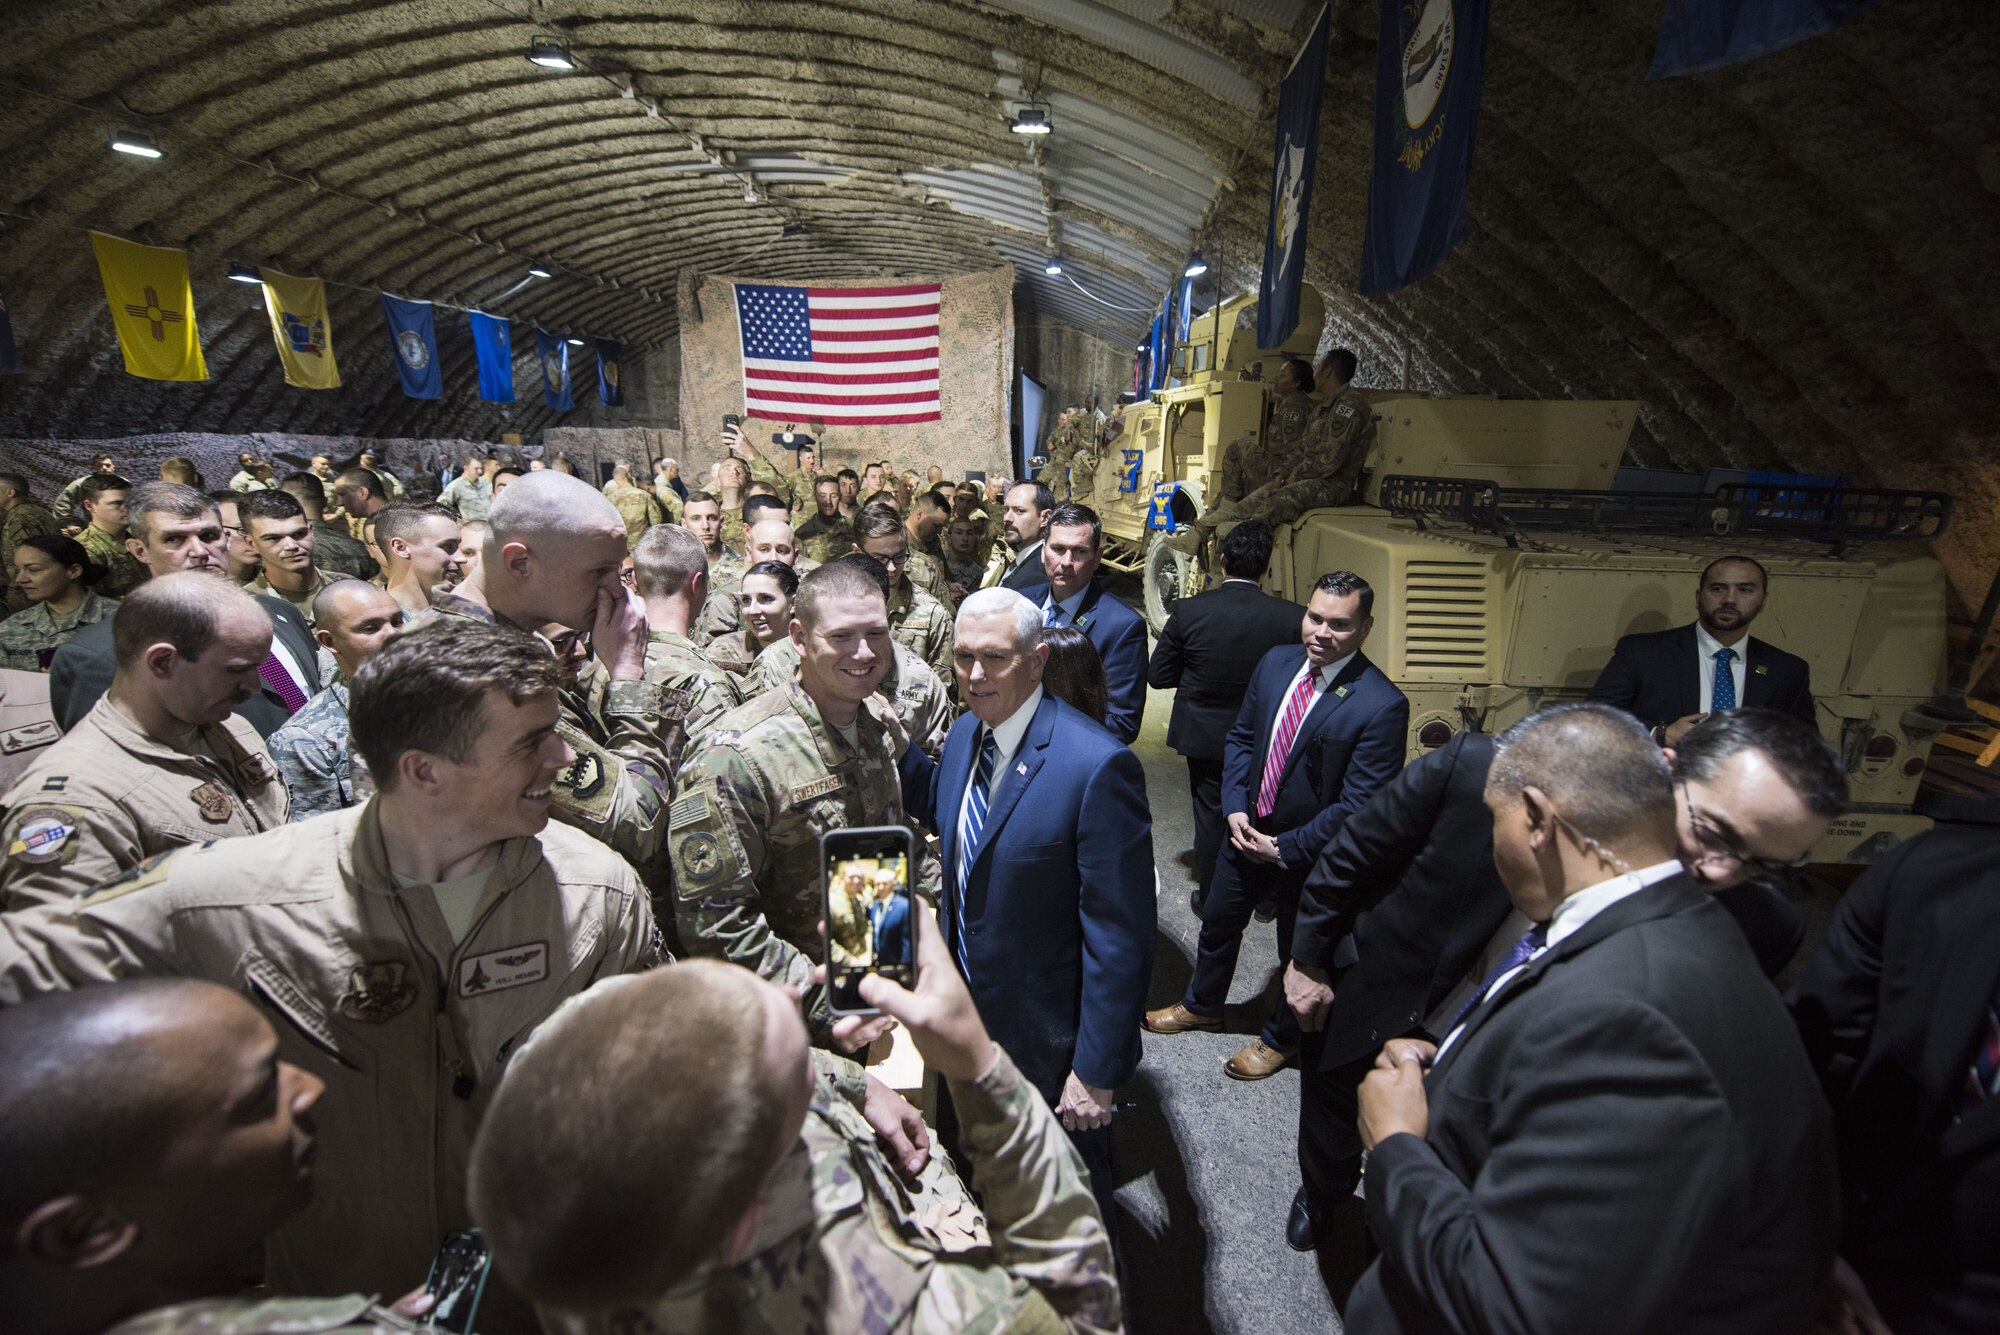 U.S. Vice President Mike Pence poses for photos with Airmen assigned to the 332d Air Expeditionary Wing, January 21, 2018 at an undisclosed location in Southwest Asia. During a speech delivered to a large crowd gathered to greet him, Pence praised service members for their continued dedication to the mission despite their own personal sacrifices. (U.S. Air Force photo by Staff Sgt. Joshua Kleinholz)